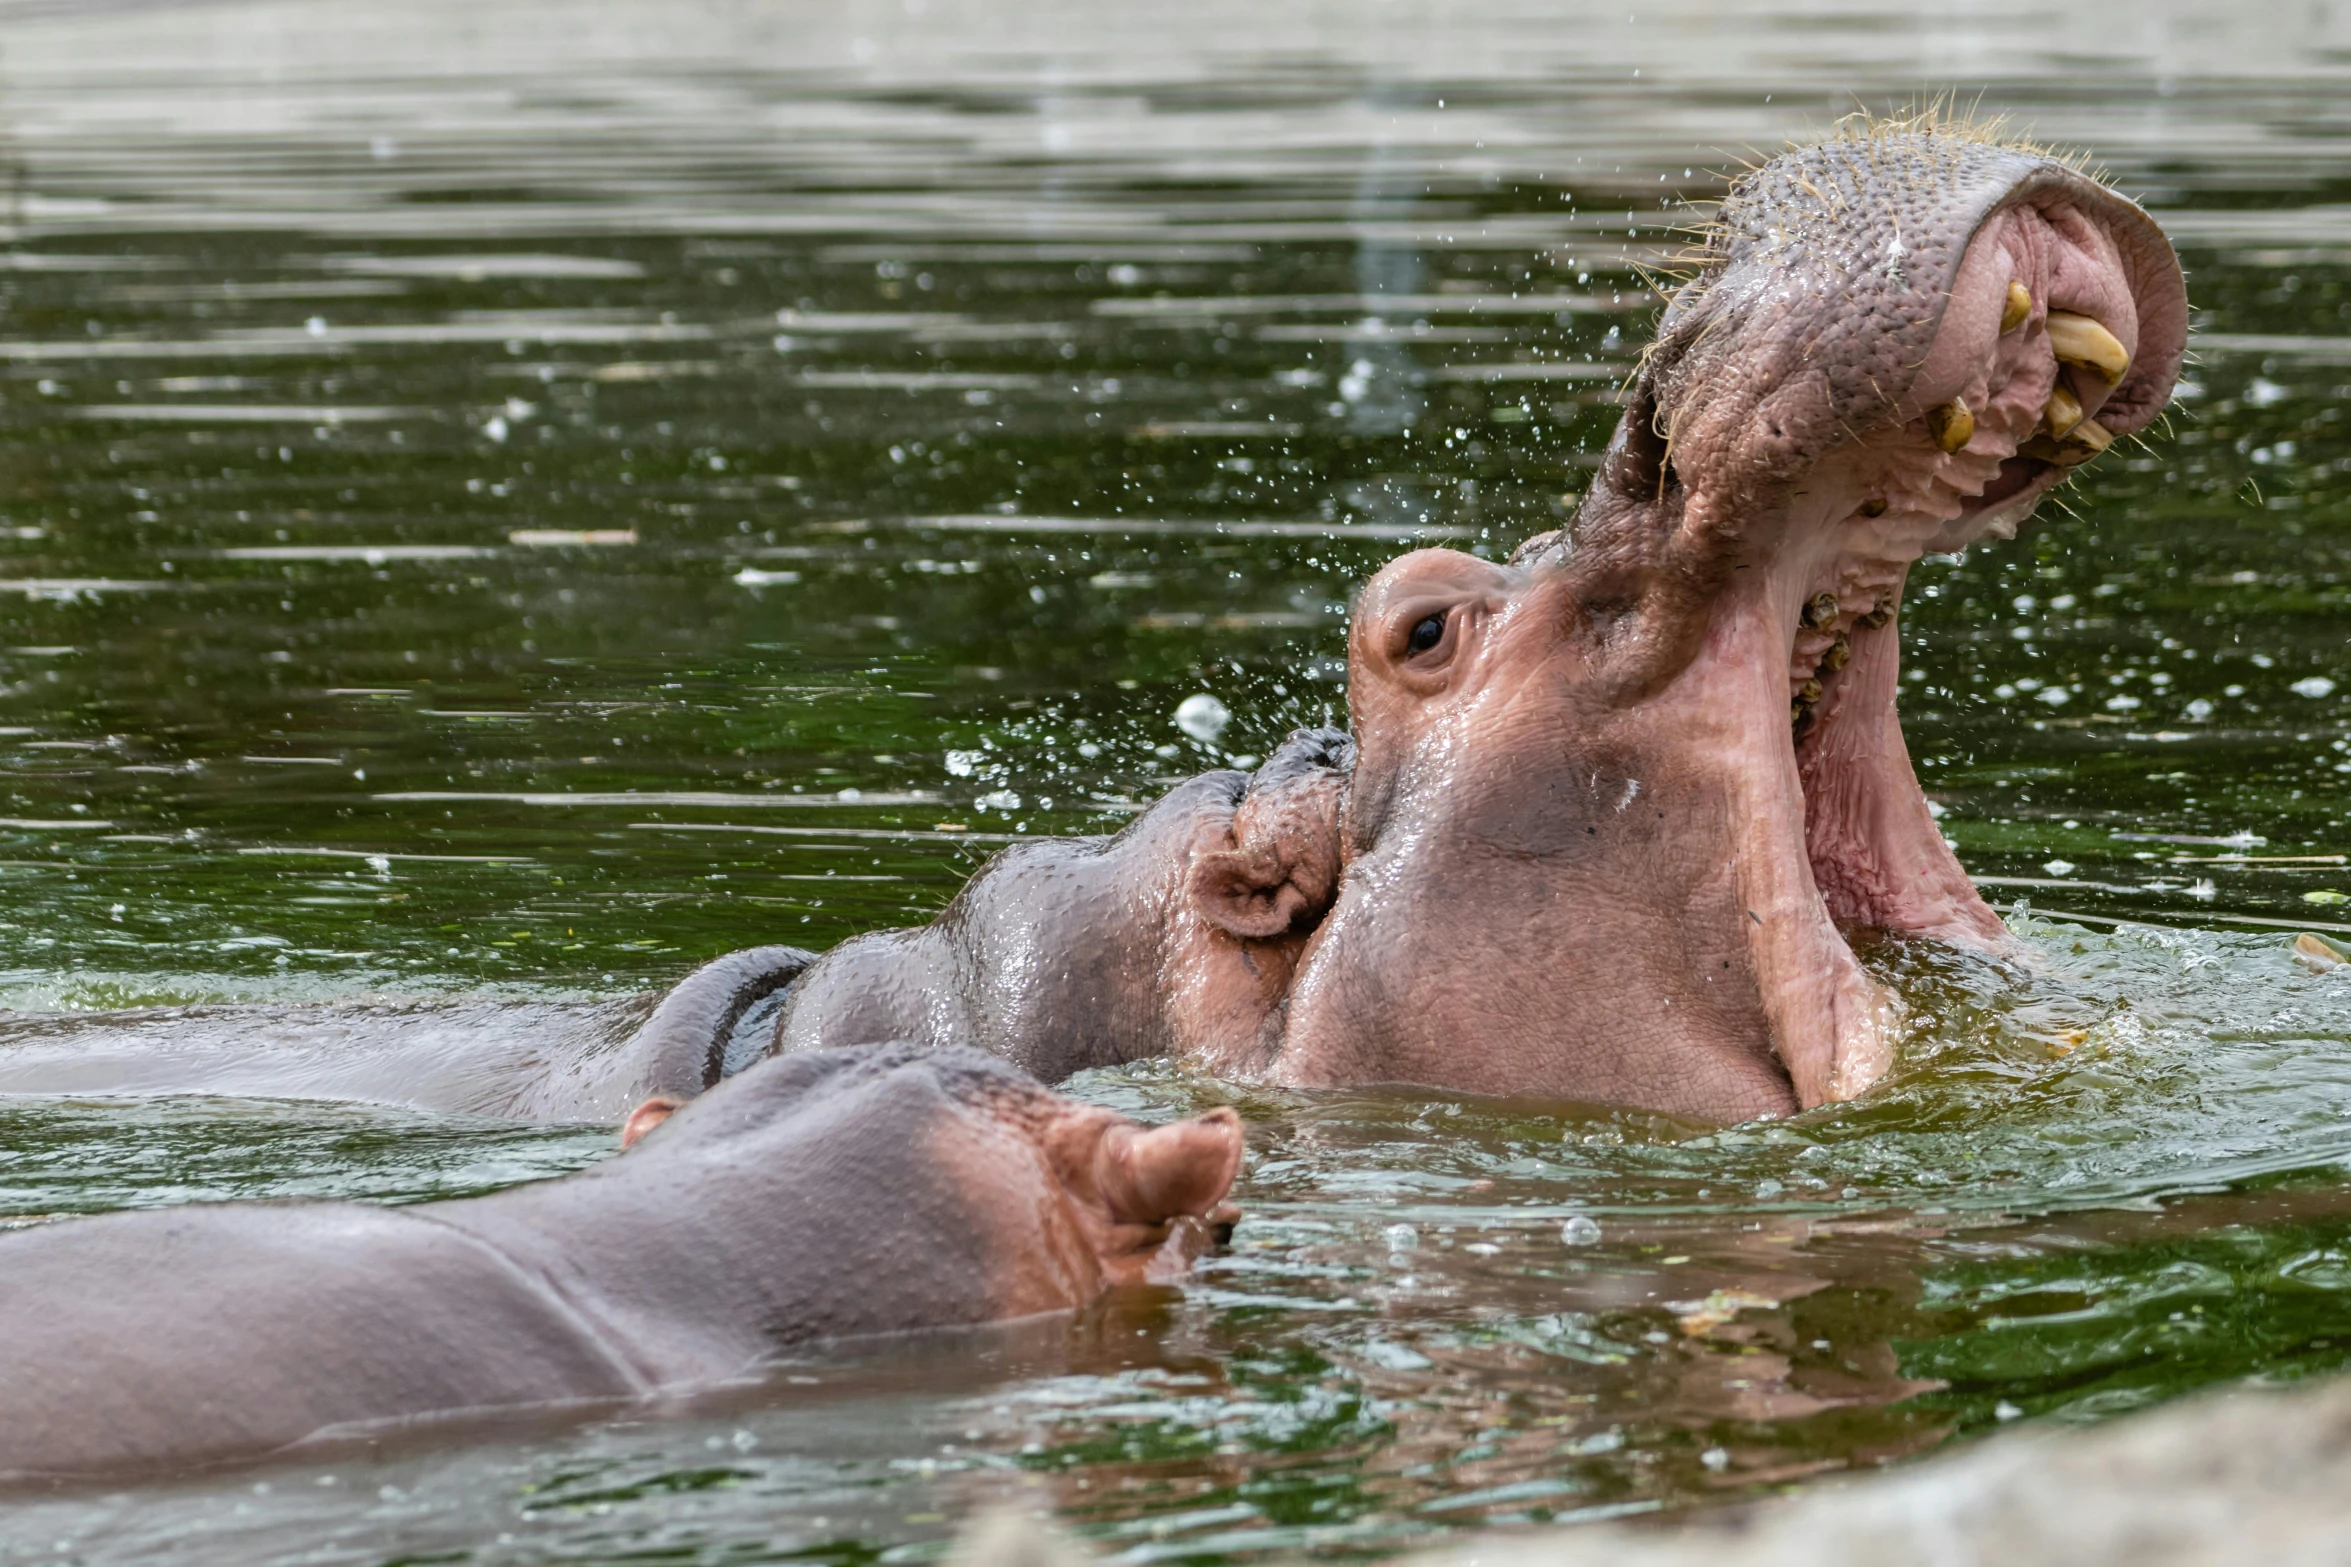 two hippopotamus are in the water next to each other